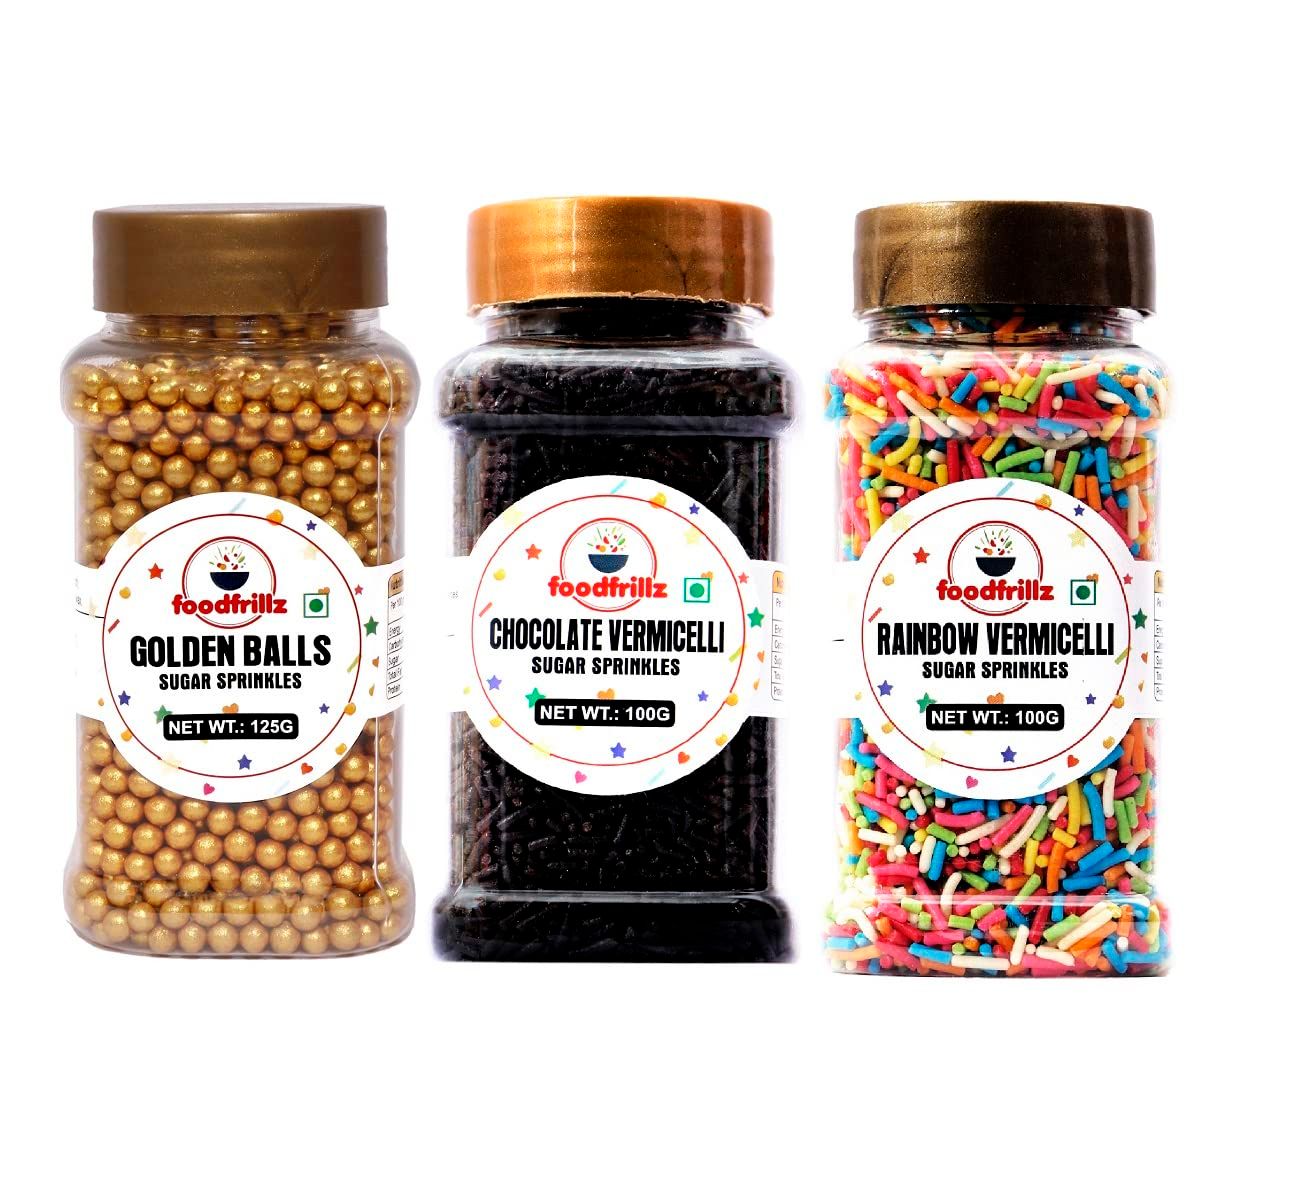 foodfrillz Golden Balls (125 g), Chocolate Vermicelli Strands (100 g) and Rainbow Strands (100 g) Sugar Sprinkles for cake decoration, 325 g, Pack of 3